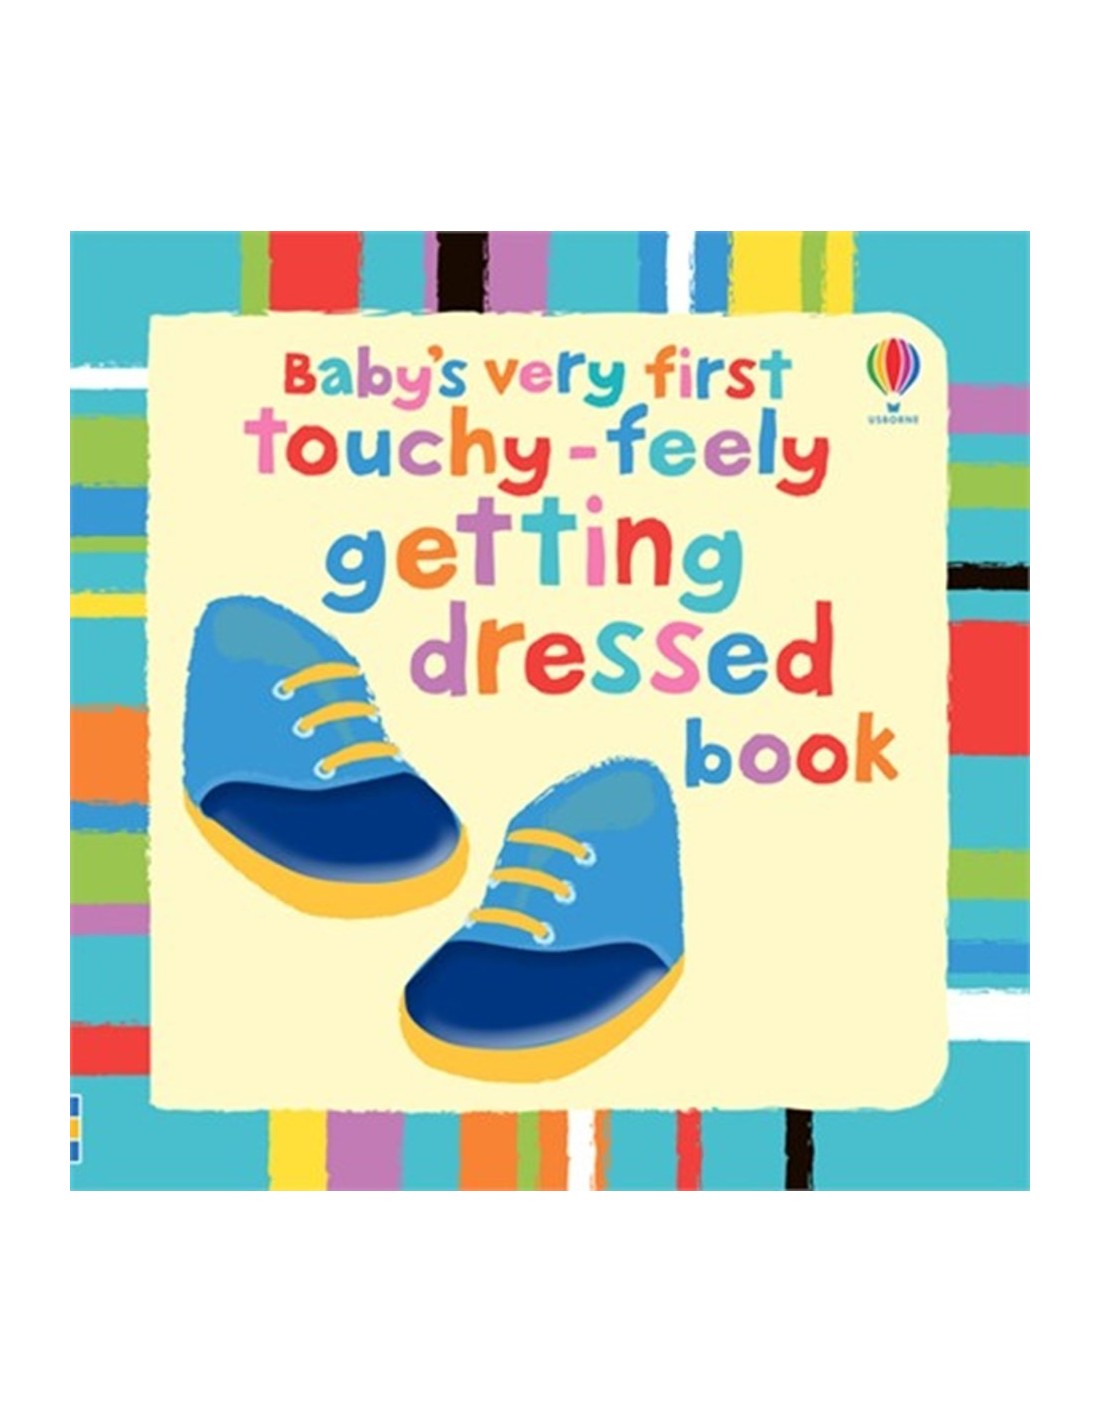 Baby's very first touchy-feely getting dressed book